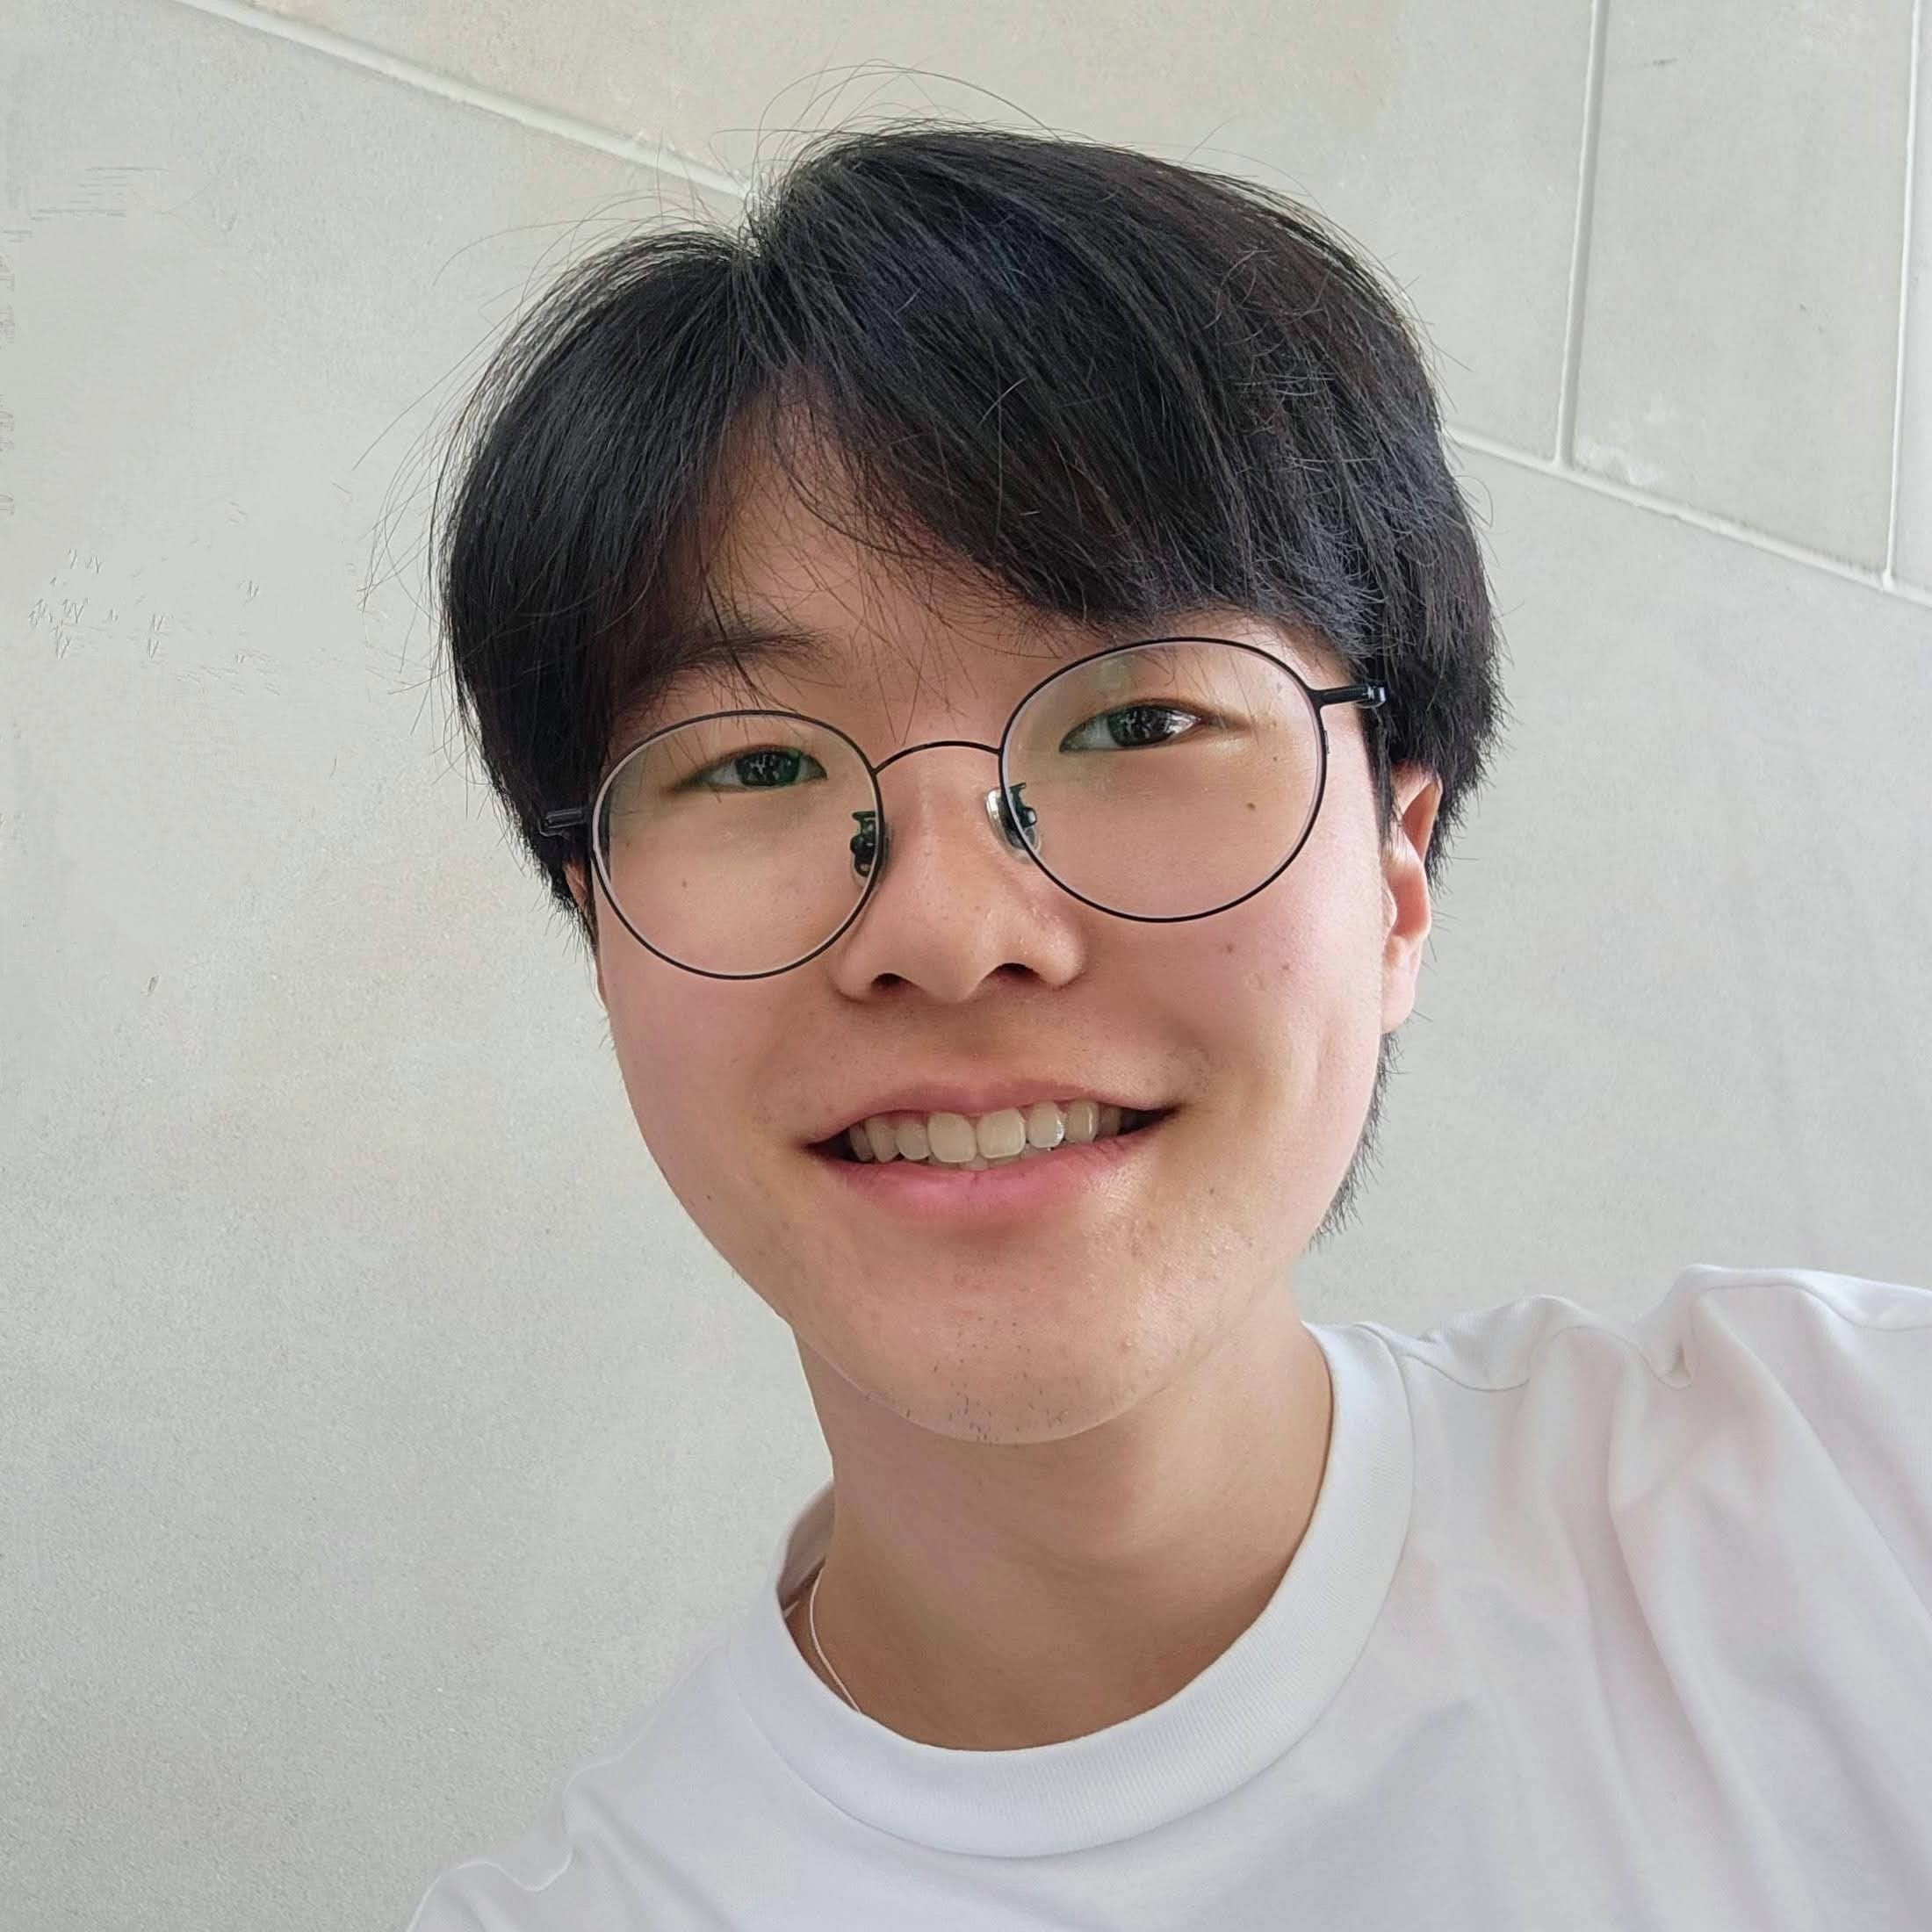 Jeremy Hwang is a first year mechanical engineering major interested in making better use of sustainable energy in everyday technology. He is currently a member of construction and electronics for the SmartTree project and is looking forward to seeing the project implemented on campus.